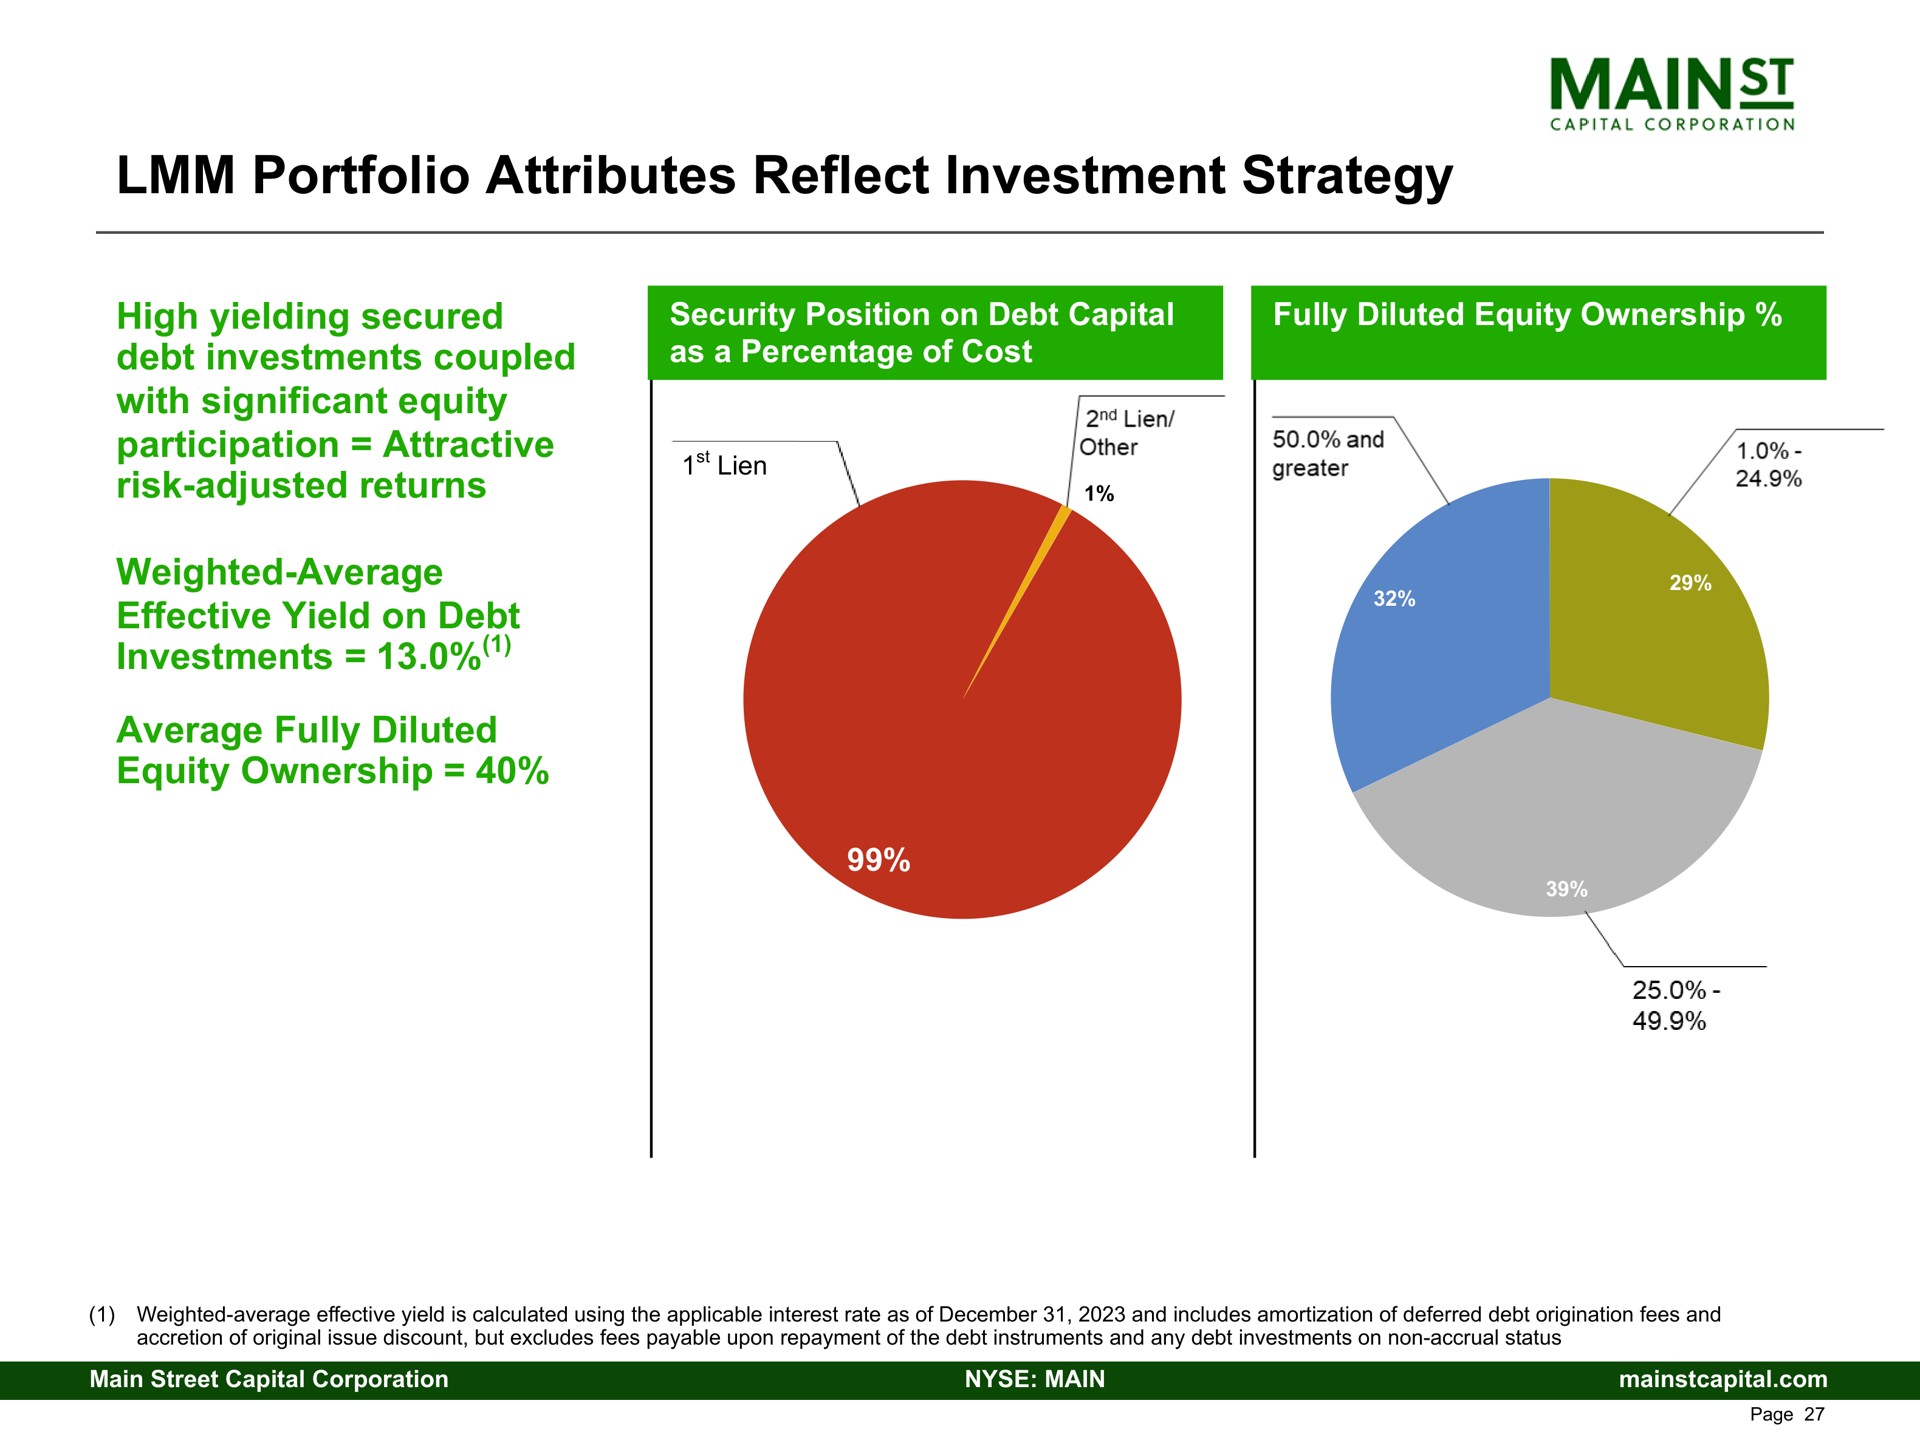 portfolio attributes reflect investment strategy investments | Main Street Capital